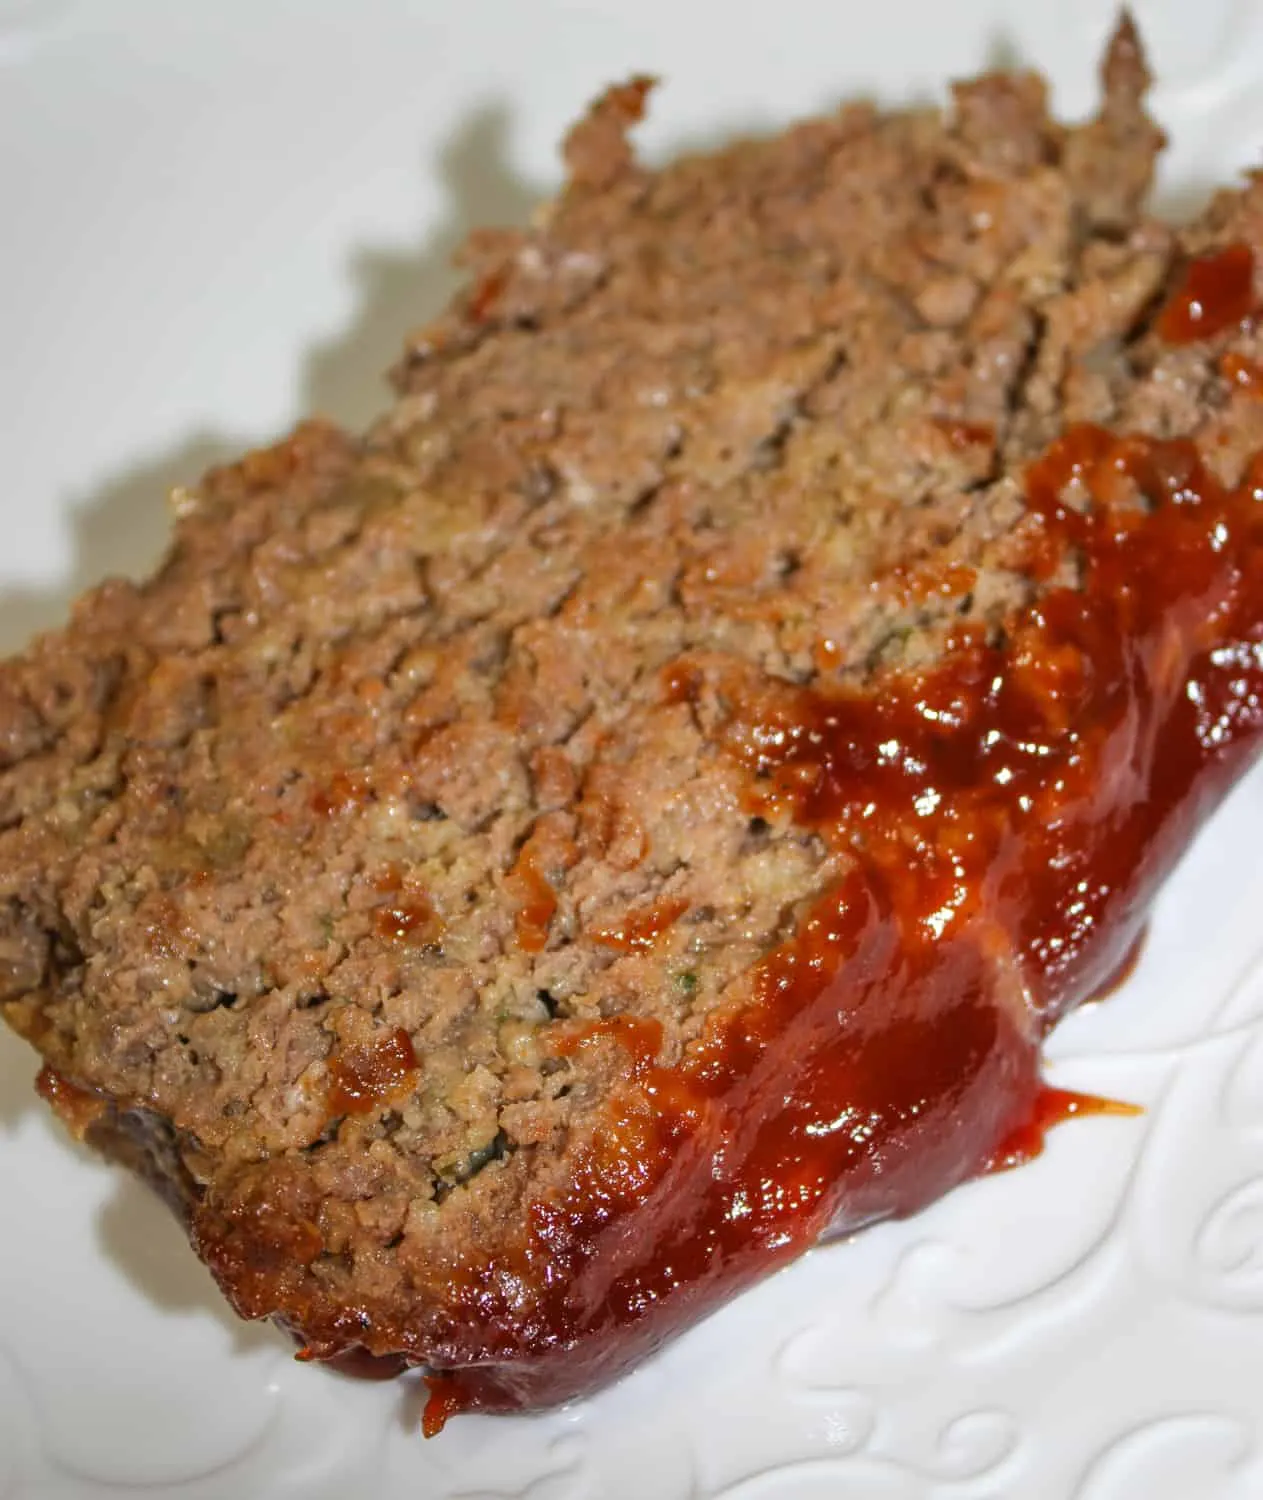 This classic Meatloaf recipe is an easy and quick recipe to prepare at the end of your day.  This version includes Gluten Free Breton Herb and Garlic crackers.